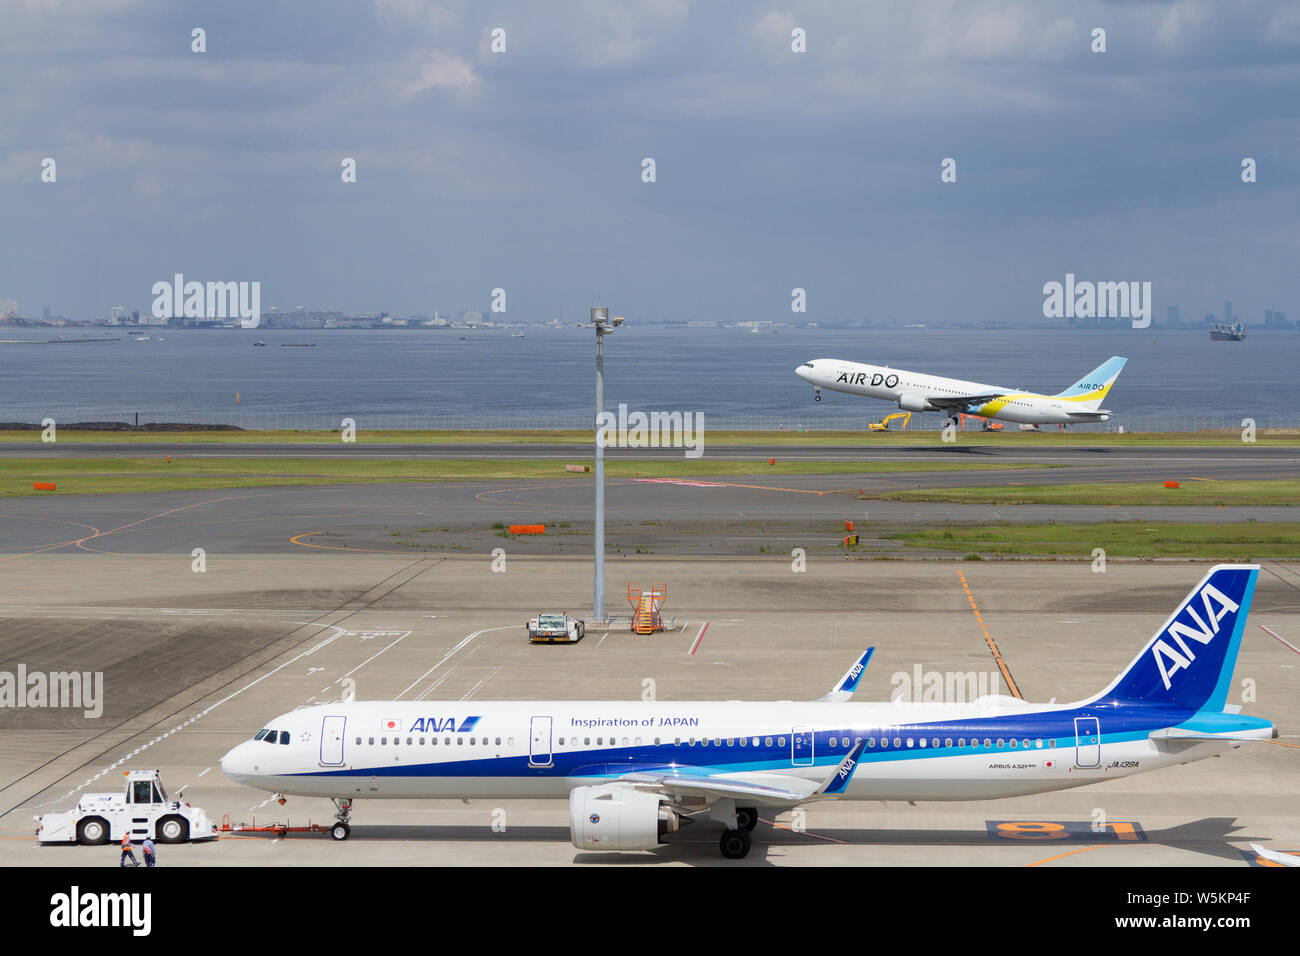 An All Nippon Airways Ana Airbus A321 272n On The Apron While An Air Do Boeing 767 381 Er Takes Off From The Runway Behind At Haneda Airport Toky Stock Photo Alamy